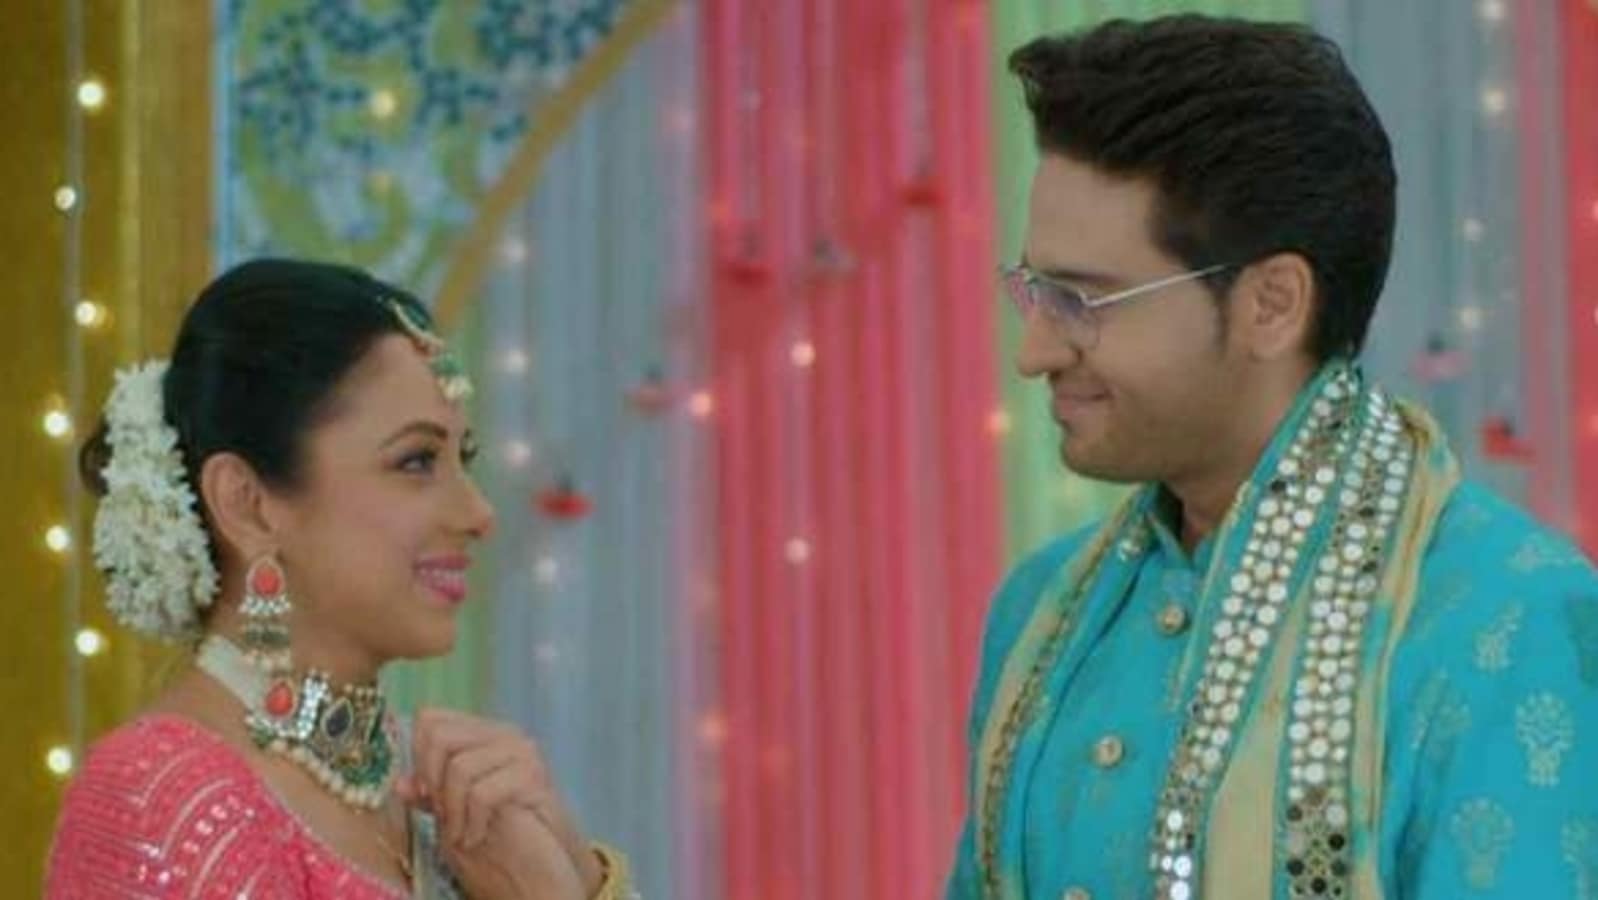 Anupama written update episode 566: Anupama and Anuj are getting engaged but rings go missing. Is Vanraj to blame?